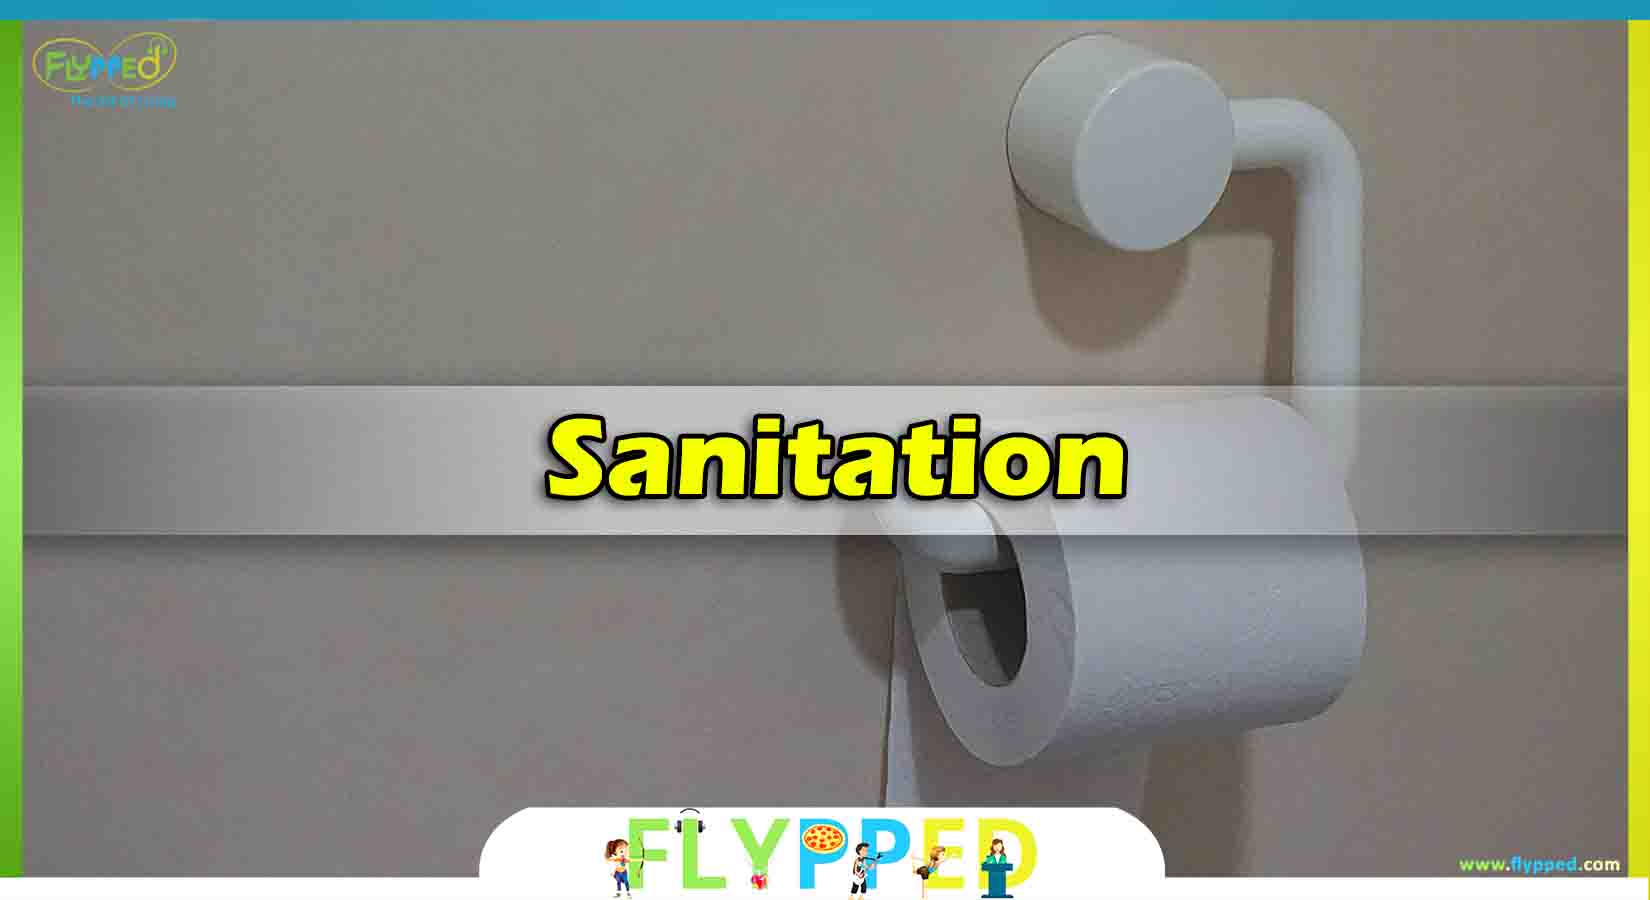 Problems-in-India-from-which-we-have-to-fight-Sanitation